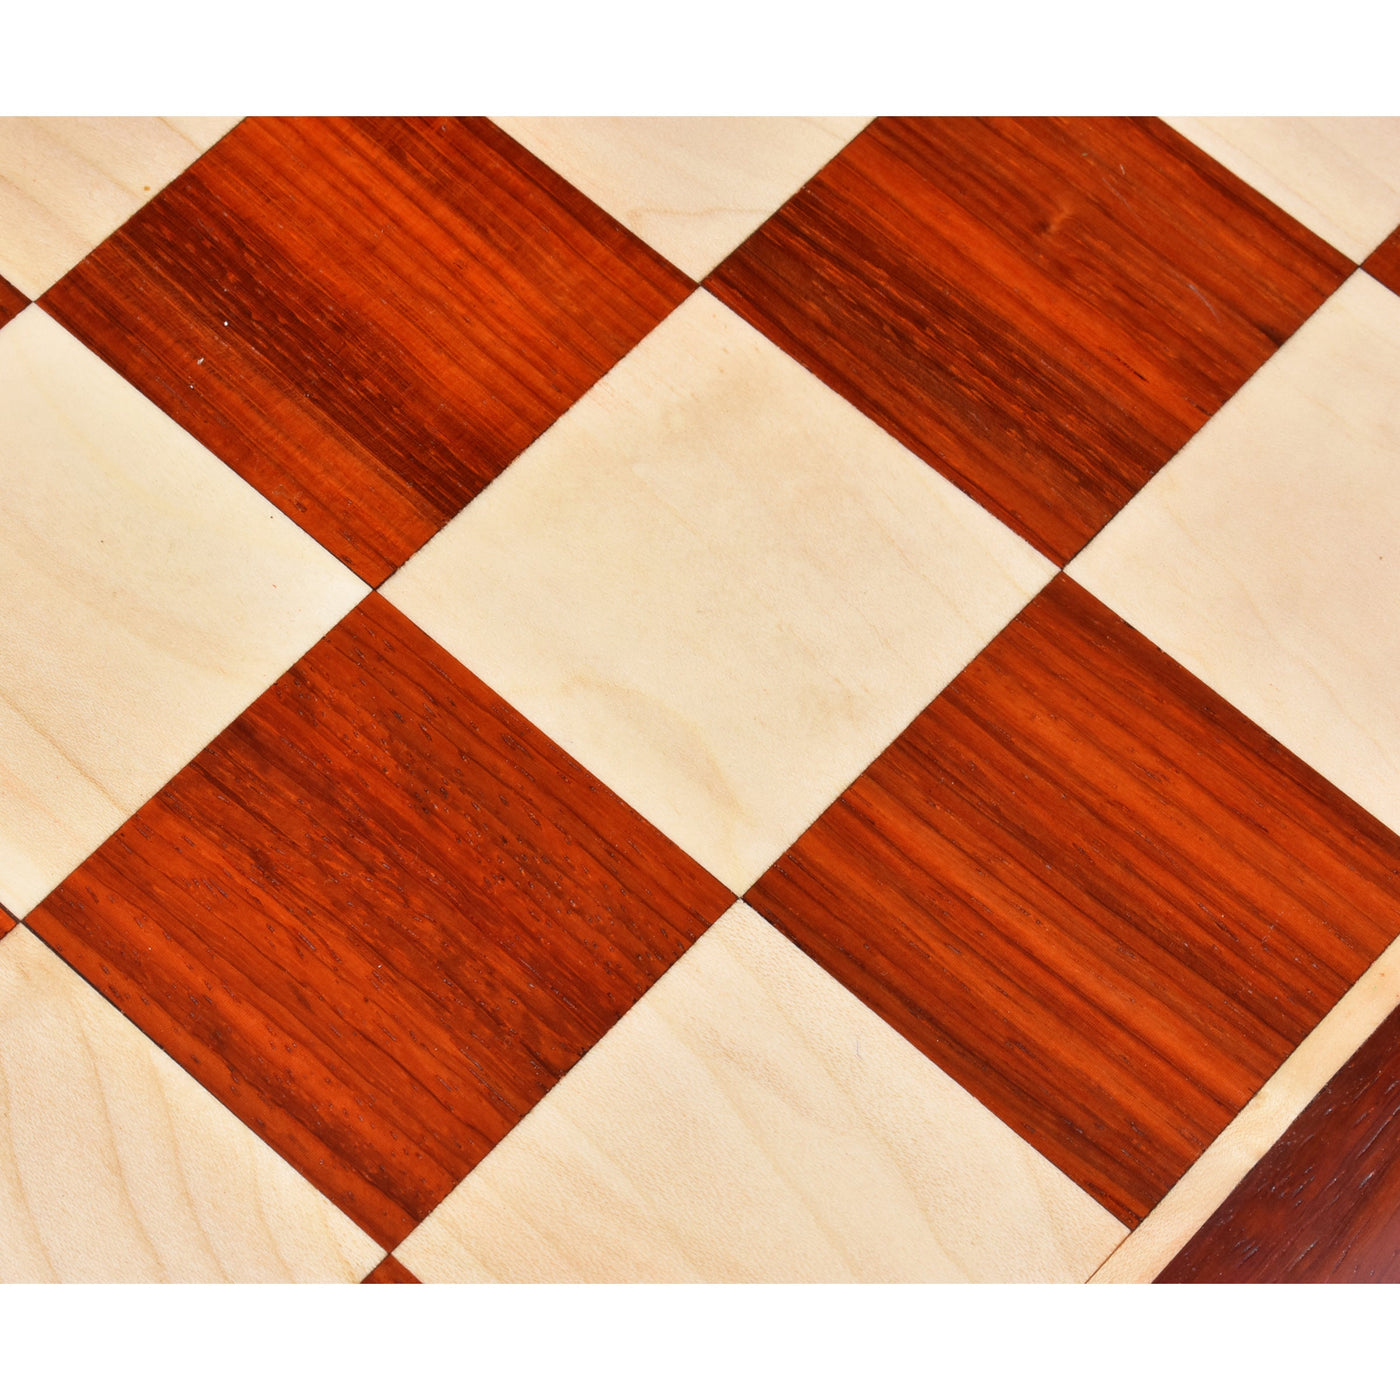 3.9" Professional Staunton Bud Rosewood Chess Pieces with 21" Bud Rosewood & Maple Wood Chess board with 55 mm Wooden Square and Book Style Storage Box